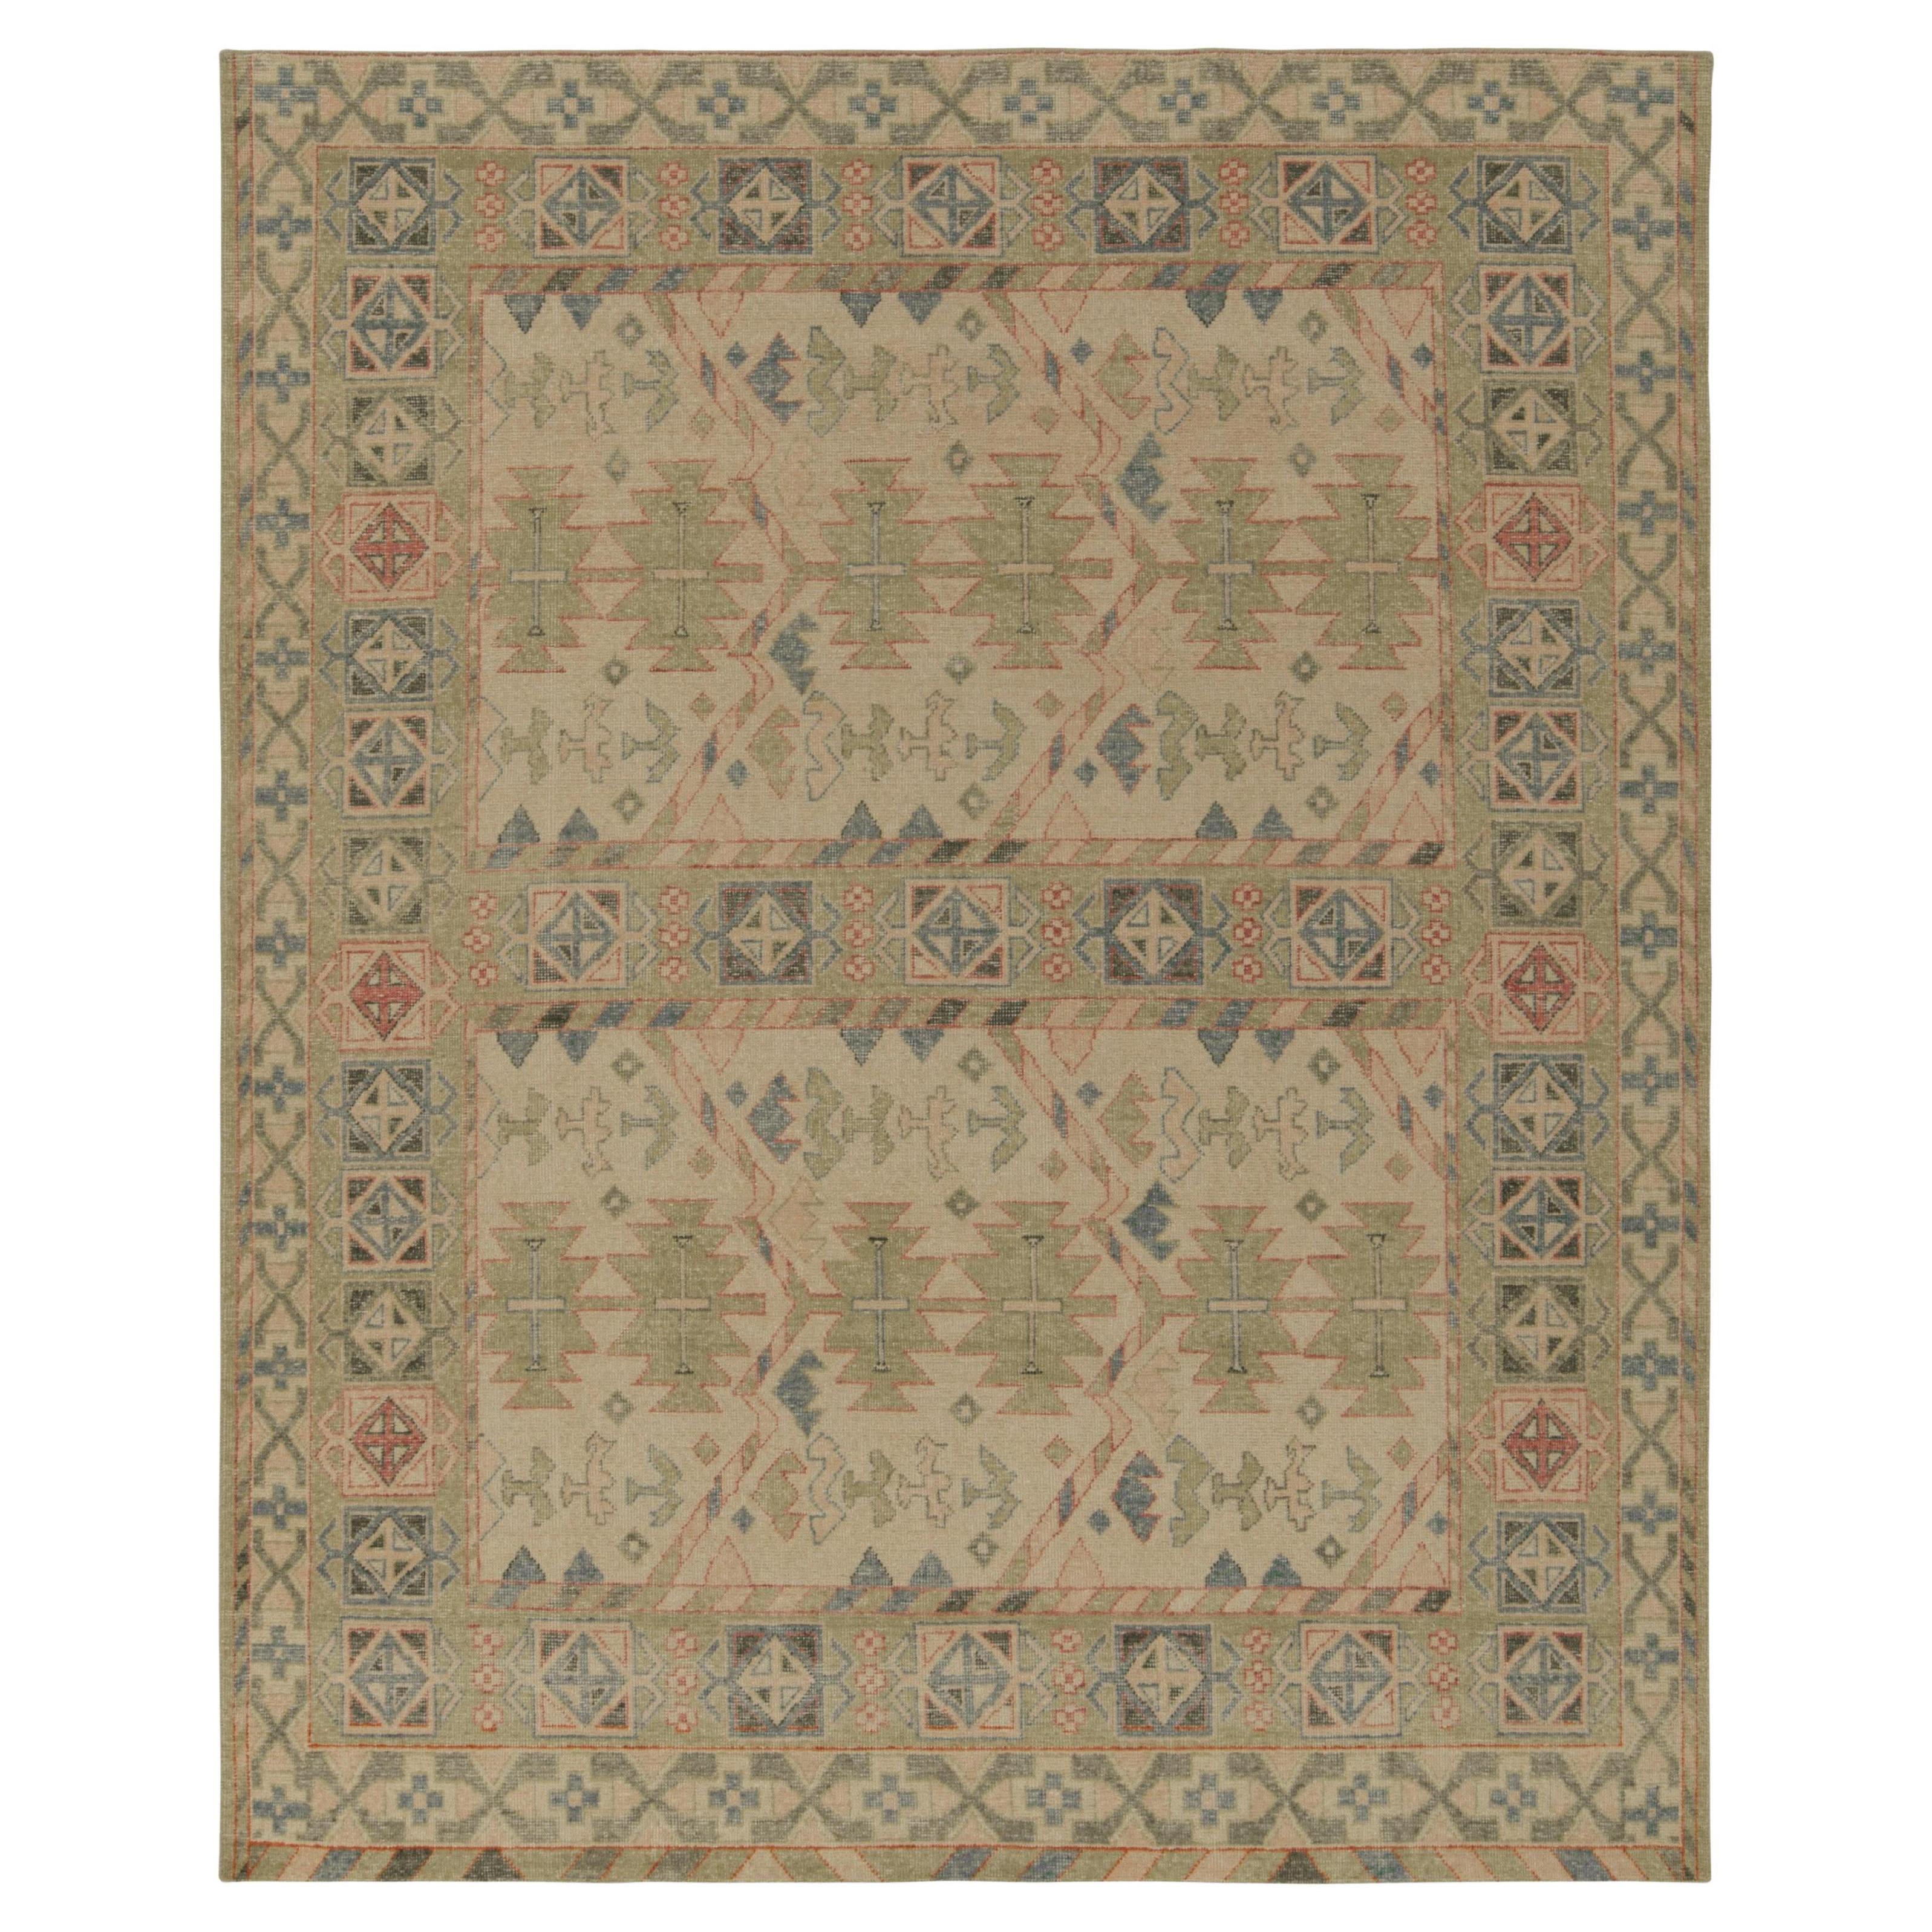 Rug & Kilim’s Distressed Style Rug in Green, Pink and Blue Tribal Patterns For Sale